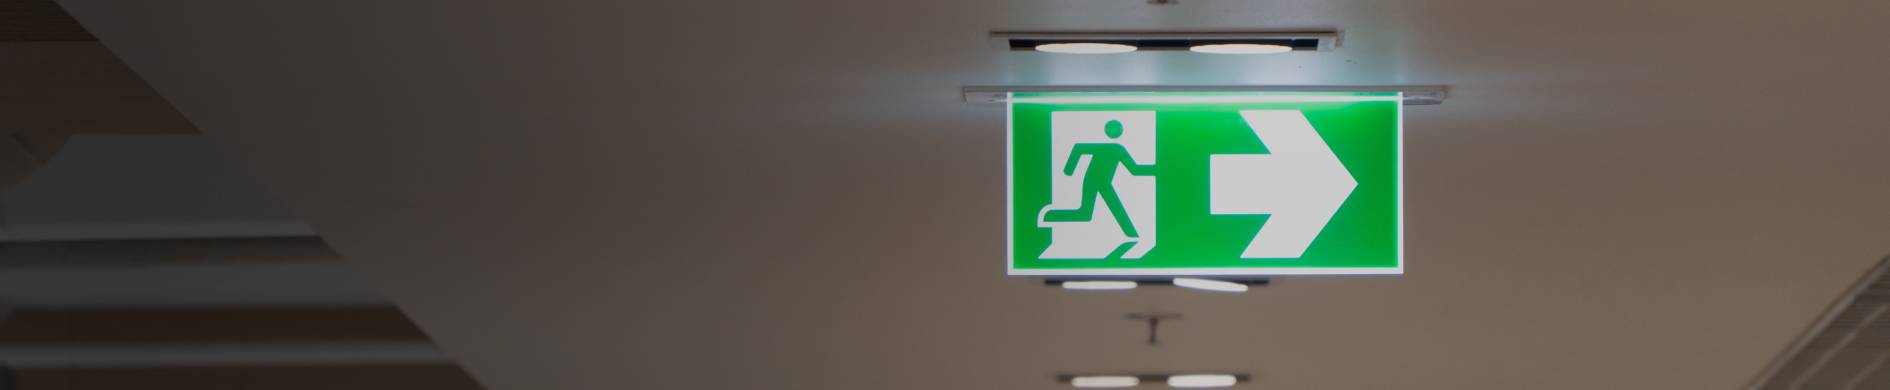 Photo of an emergency lighting sign after it was tested.